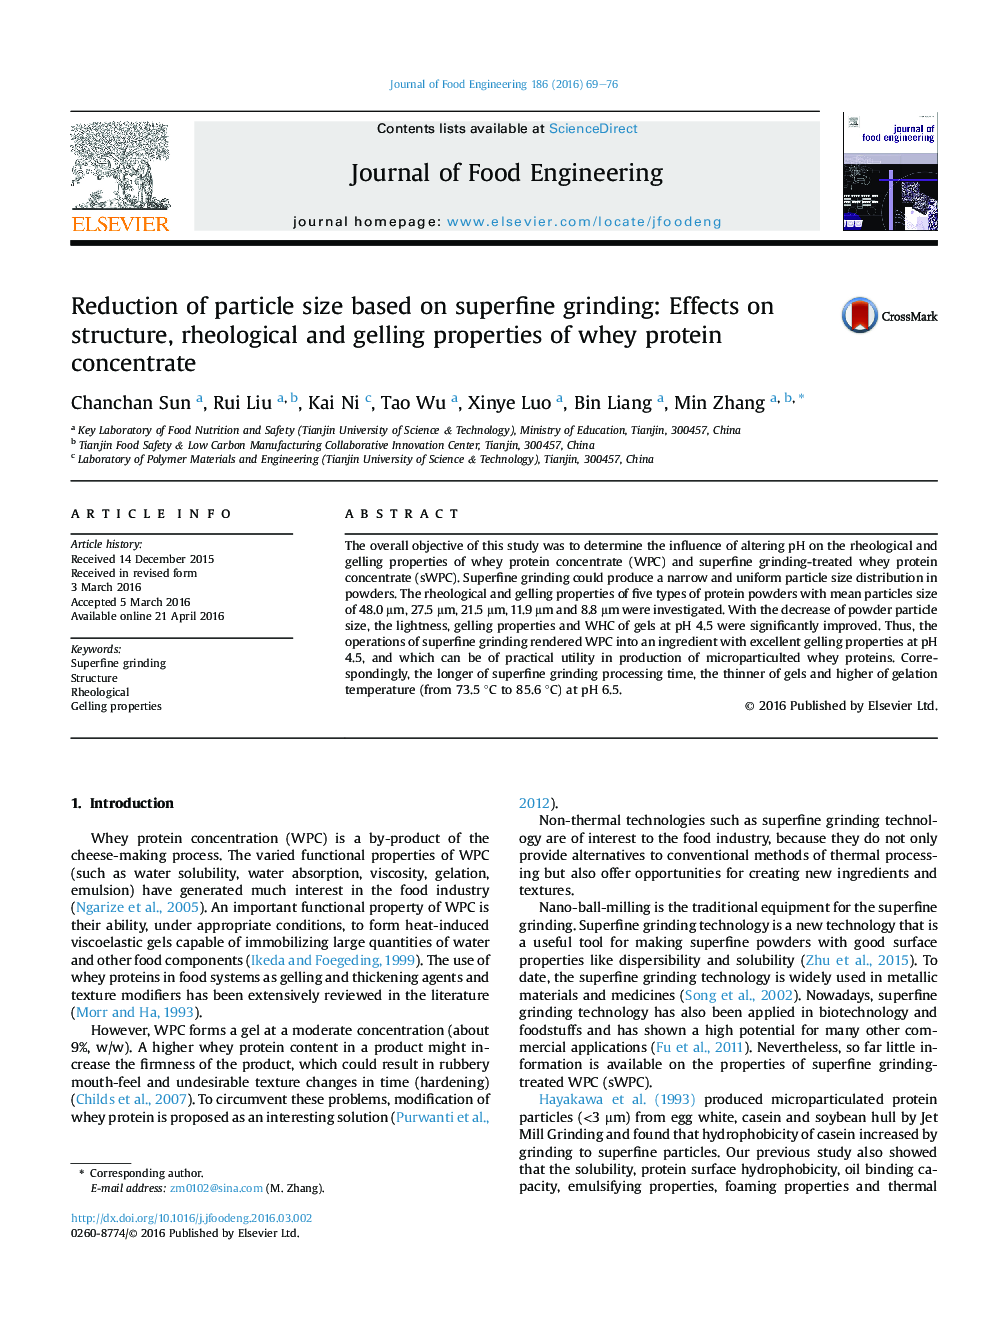 Reduction of particle size based on superfine grinding: Effects on structure, rheological and gelling properties of whey protein concentrate